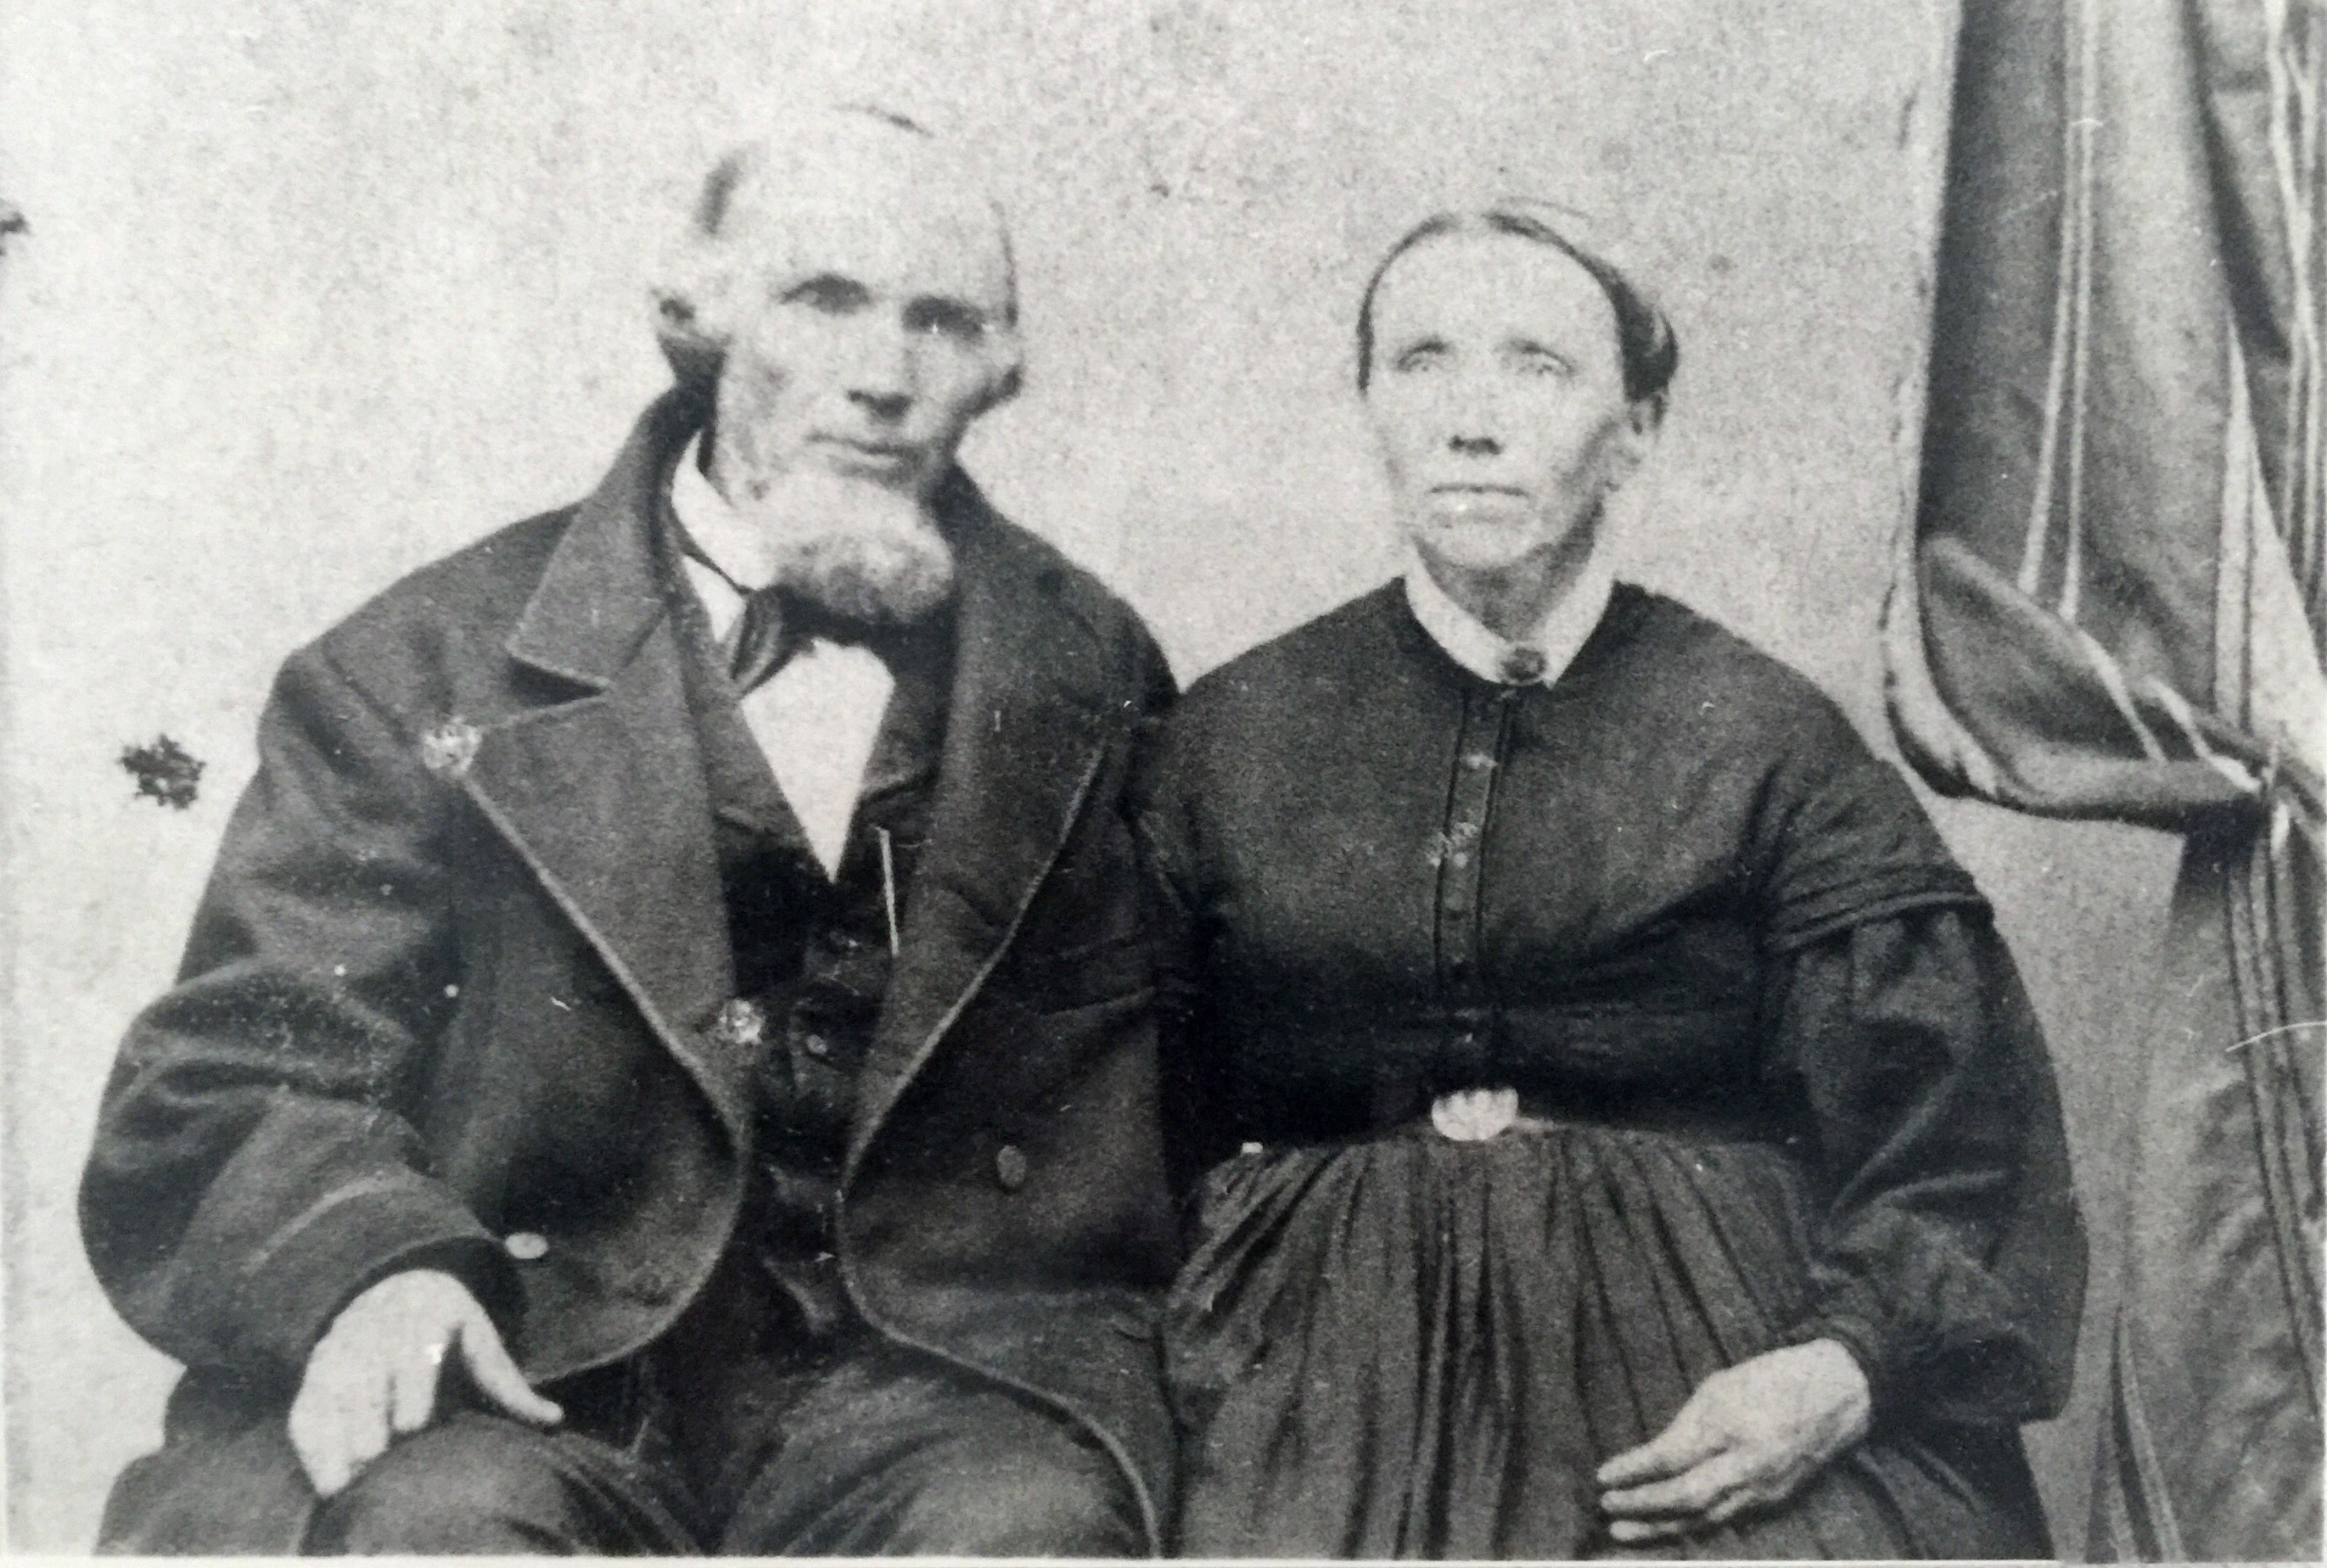 John Henry Hilvers
Born in Messing, Hanover, Germany 
April 9, 1818
Died in Benton Township, Wisconsin
August 8, 1892

Gertrude Grotkin
Born in Salsbergen, Germany
September, 1, 1827
Died in Benton Township, Wisconsin
March 16, 1893

Married in Potosi, WI on September 4, 1849